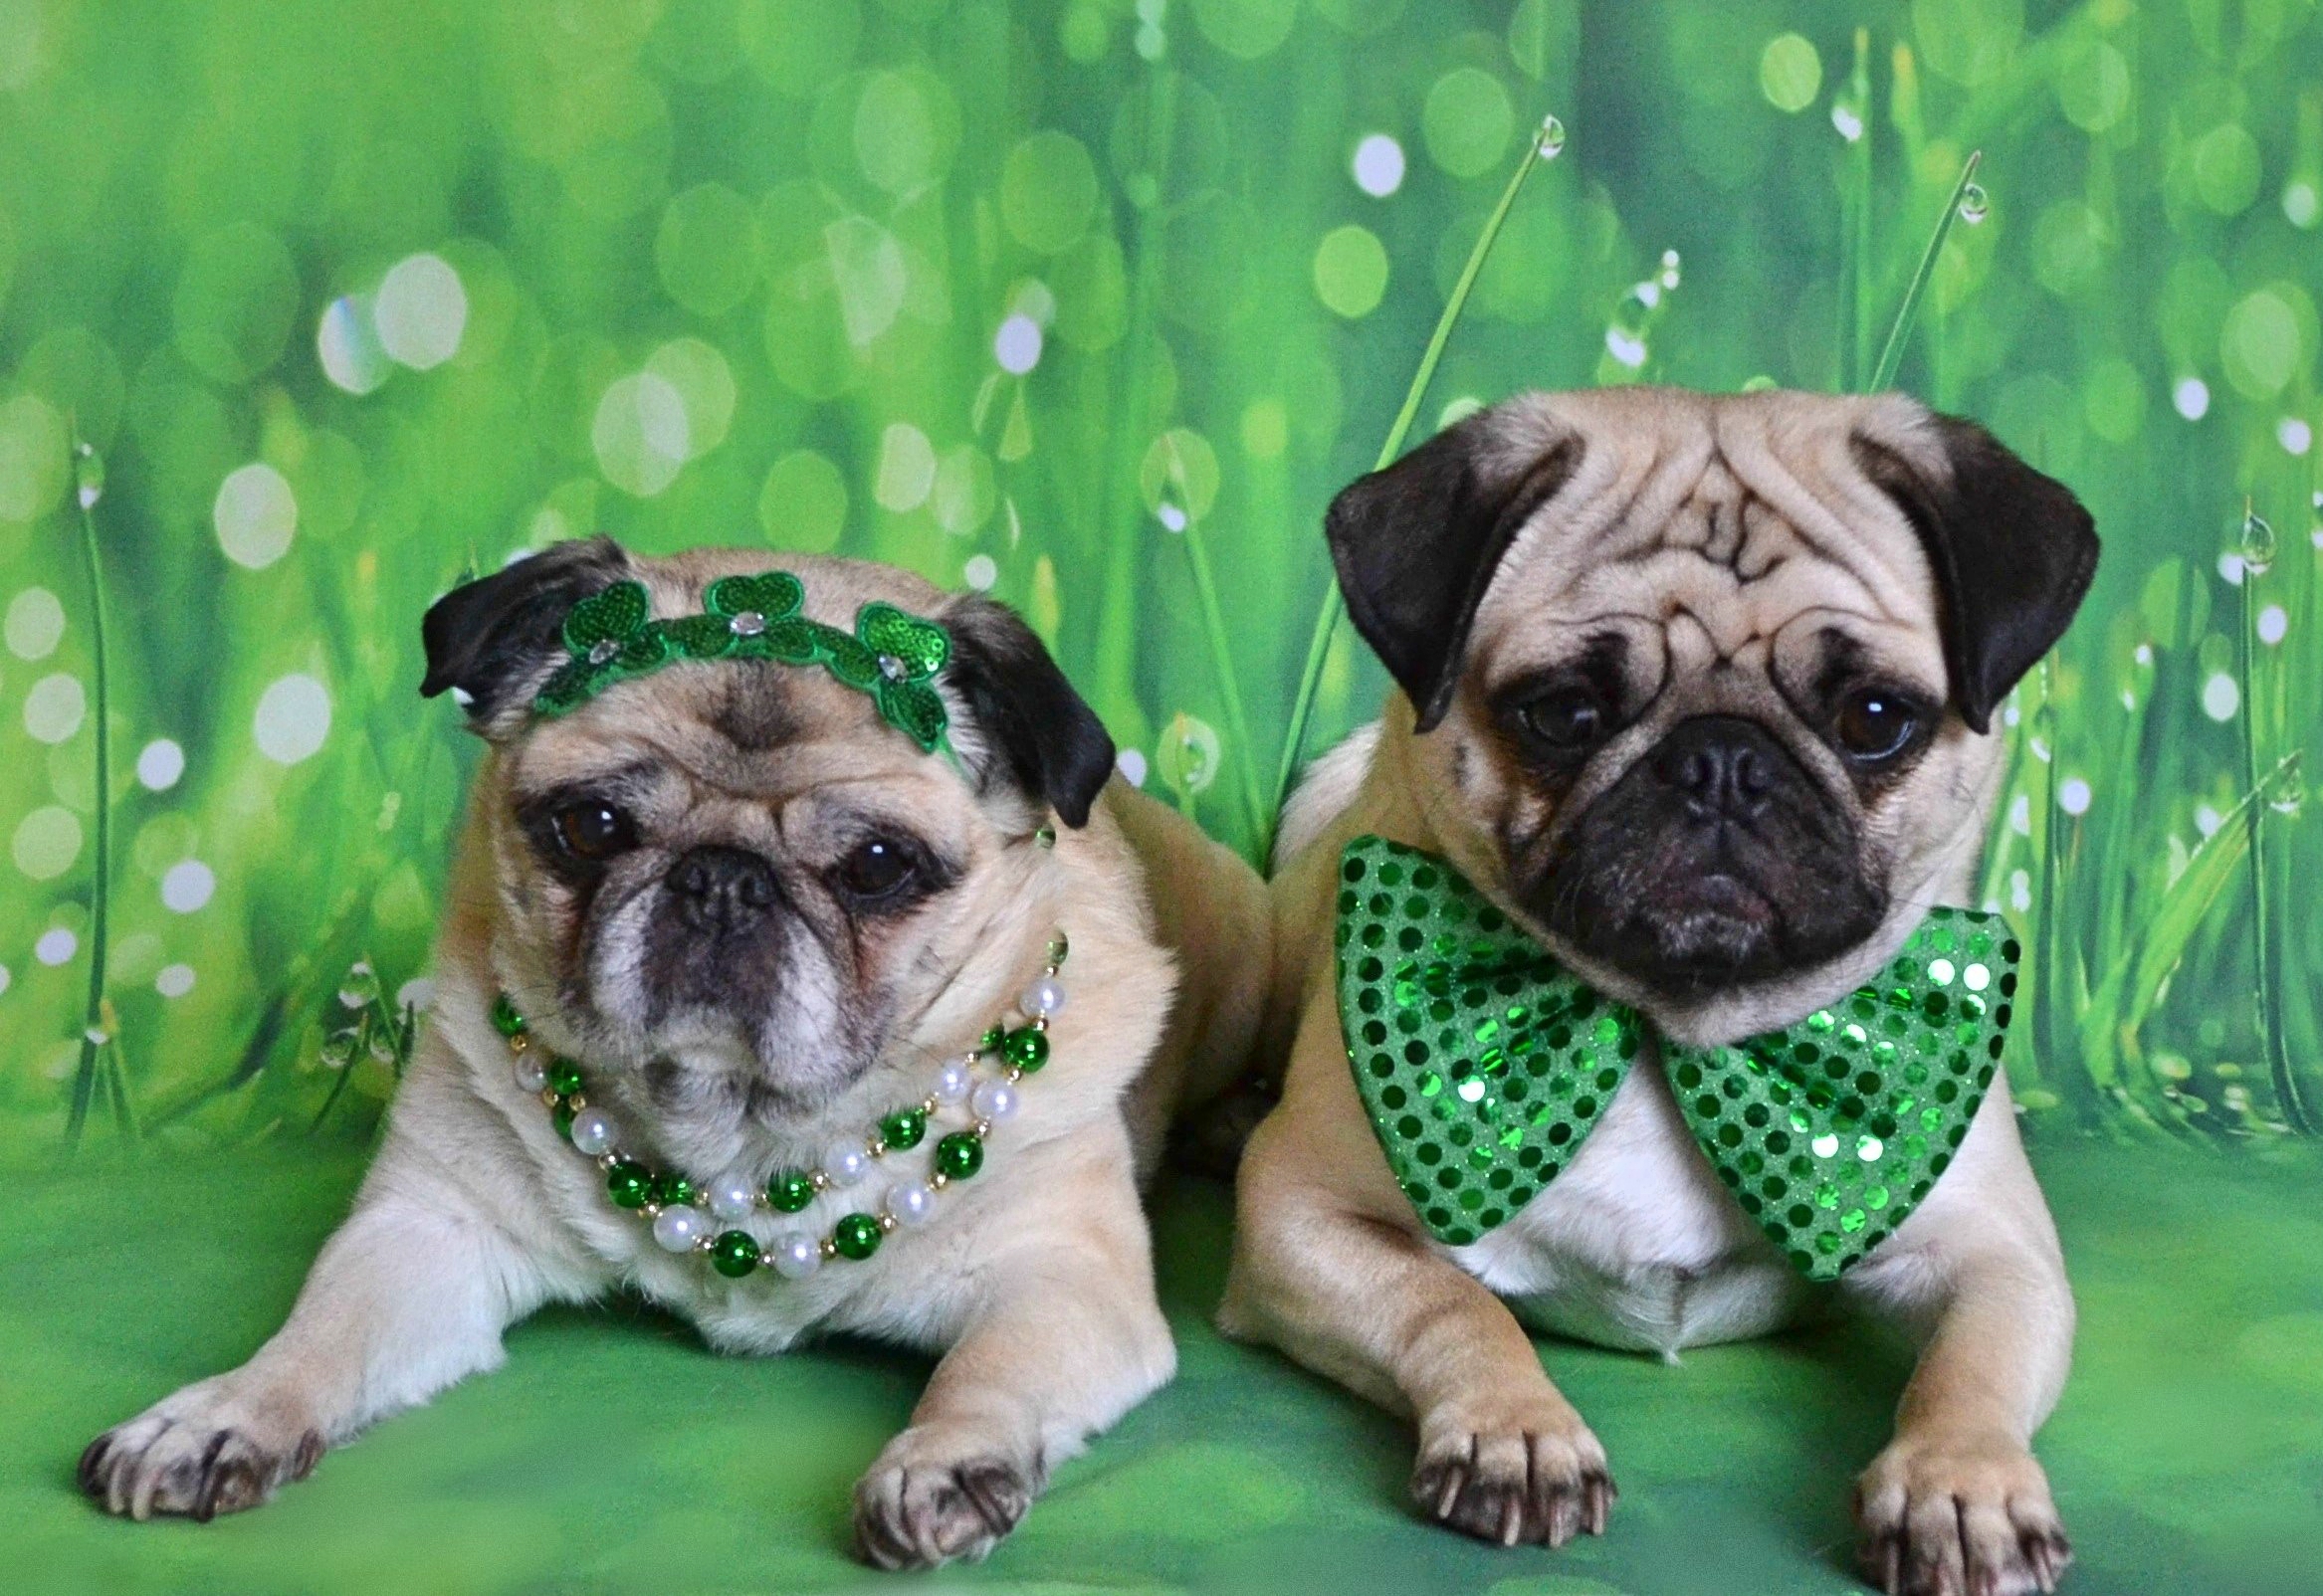 The Puglets Are St. Patrick's Day Ready